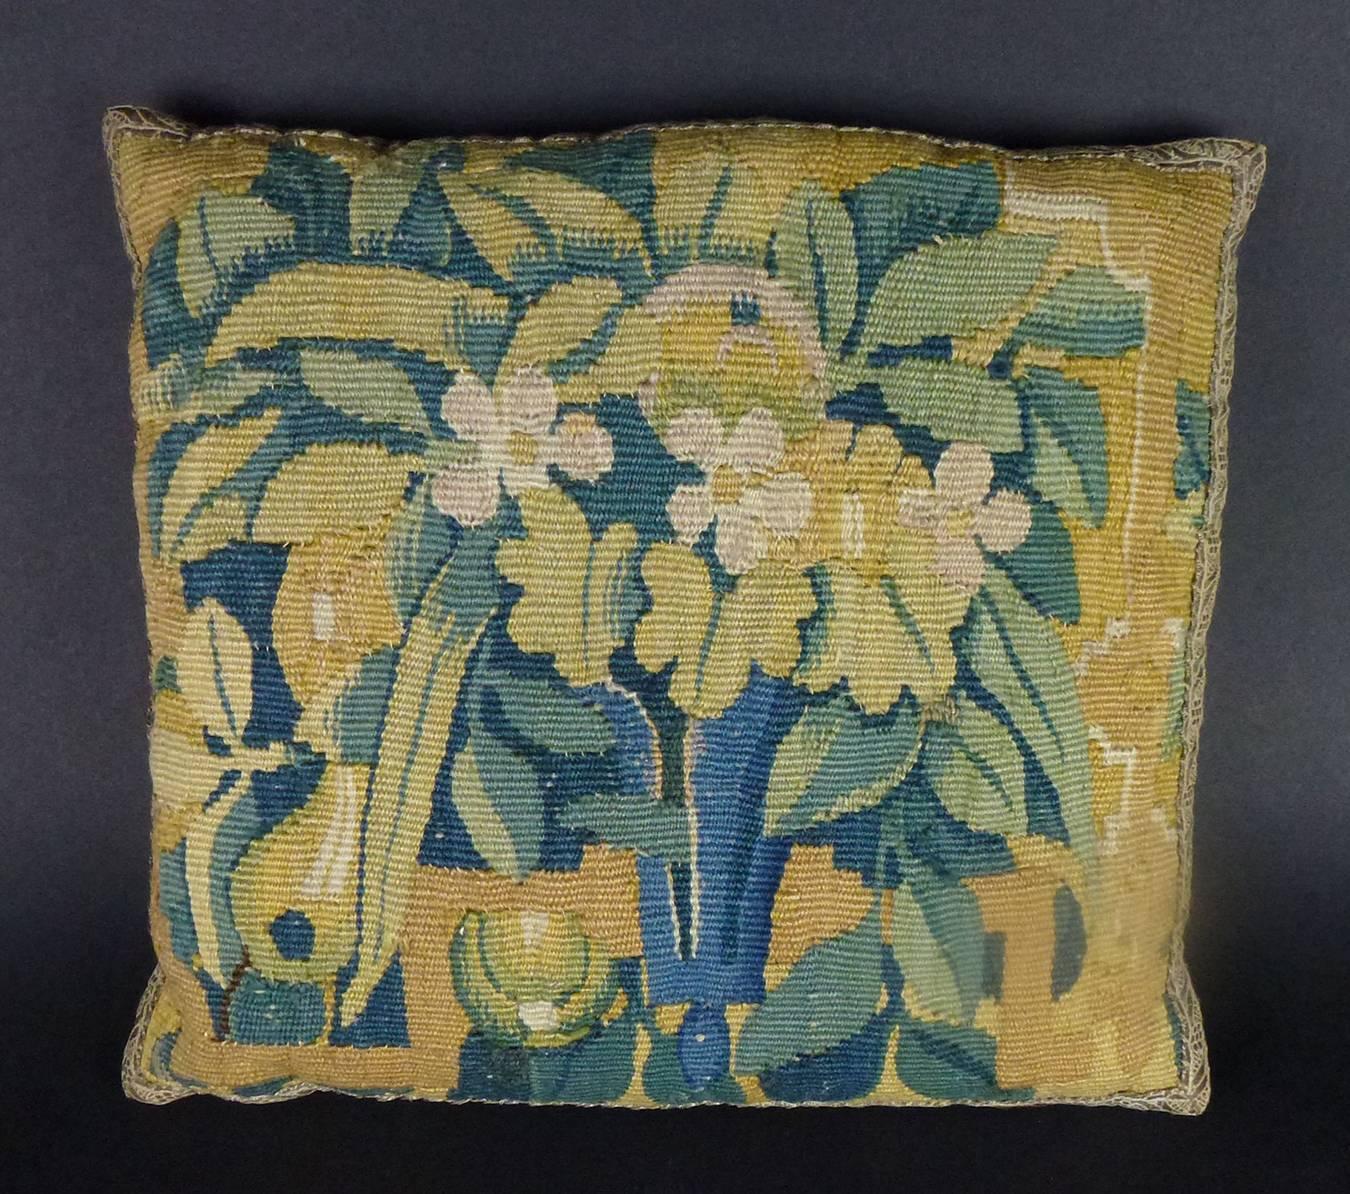 Three Baroque Brussels square tapestry wool and silk pillows, each woven with pastel-colored floral and stylized vase design on pale orange field, the needlework woven in wools and silks in naturalistic hues, each edged with antique silver-thread